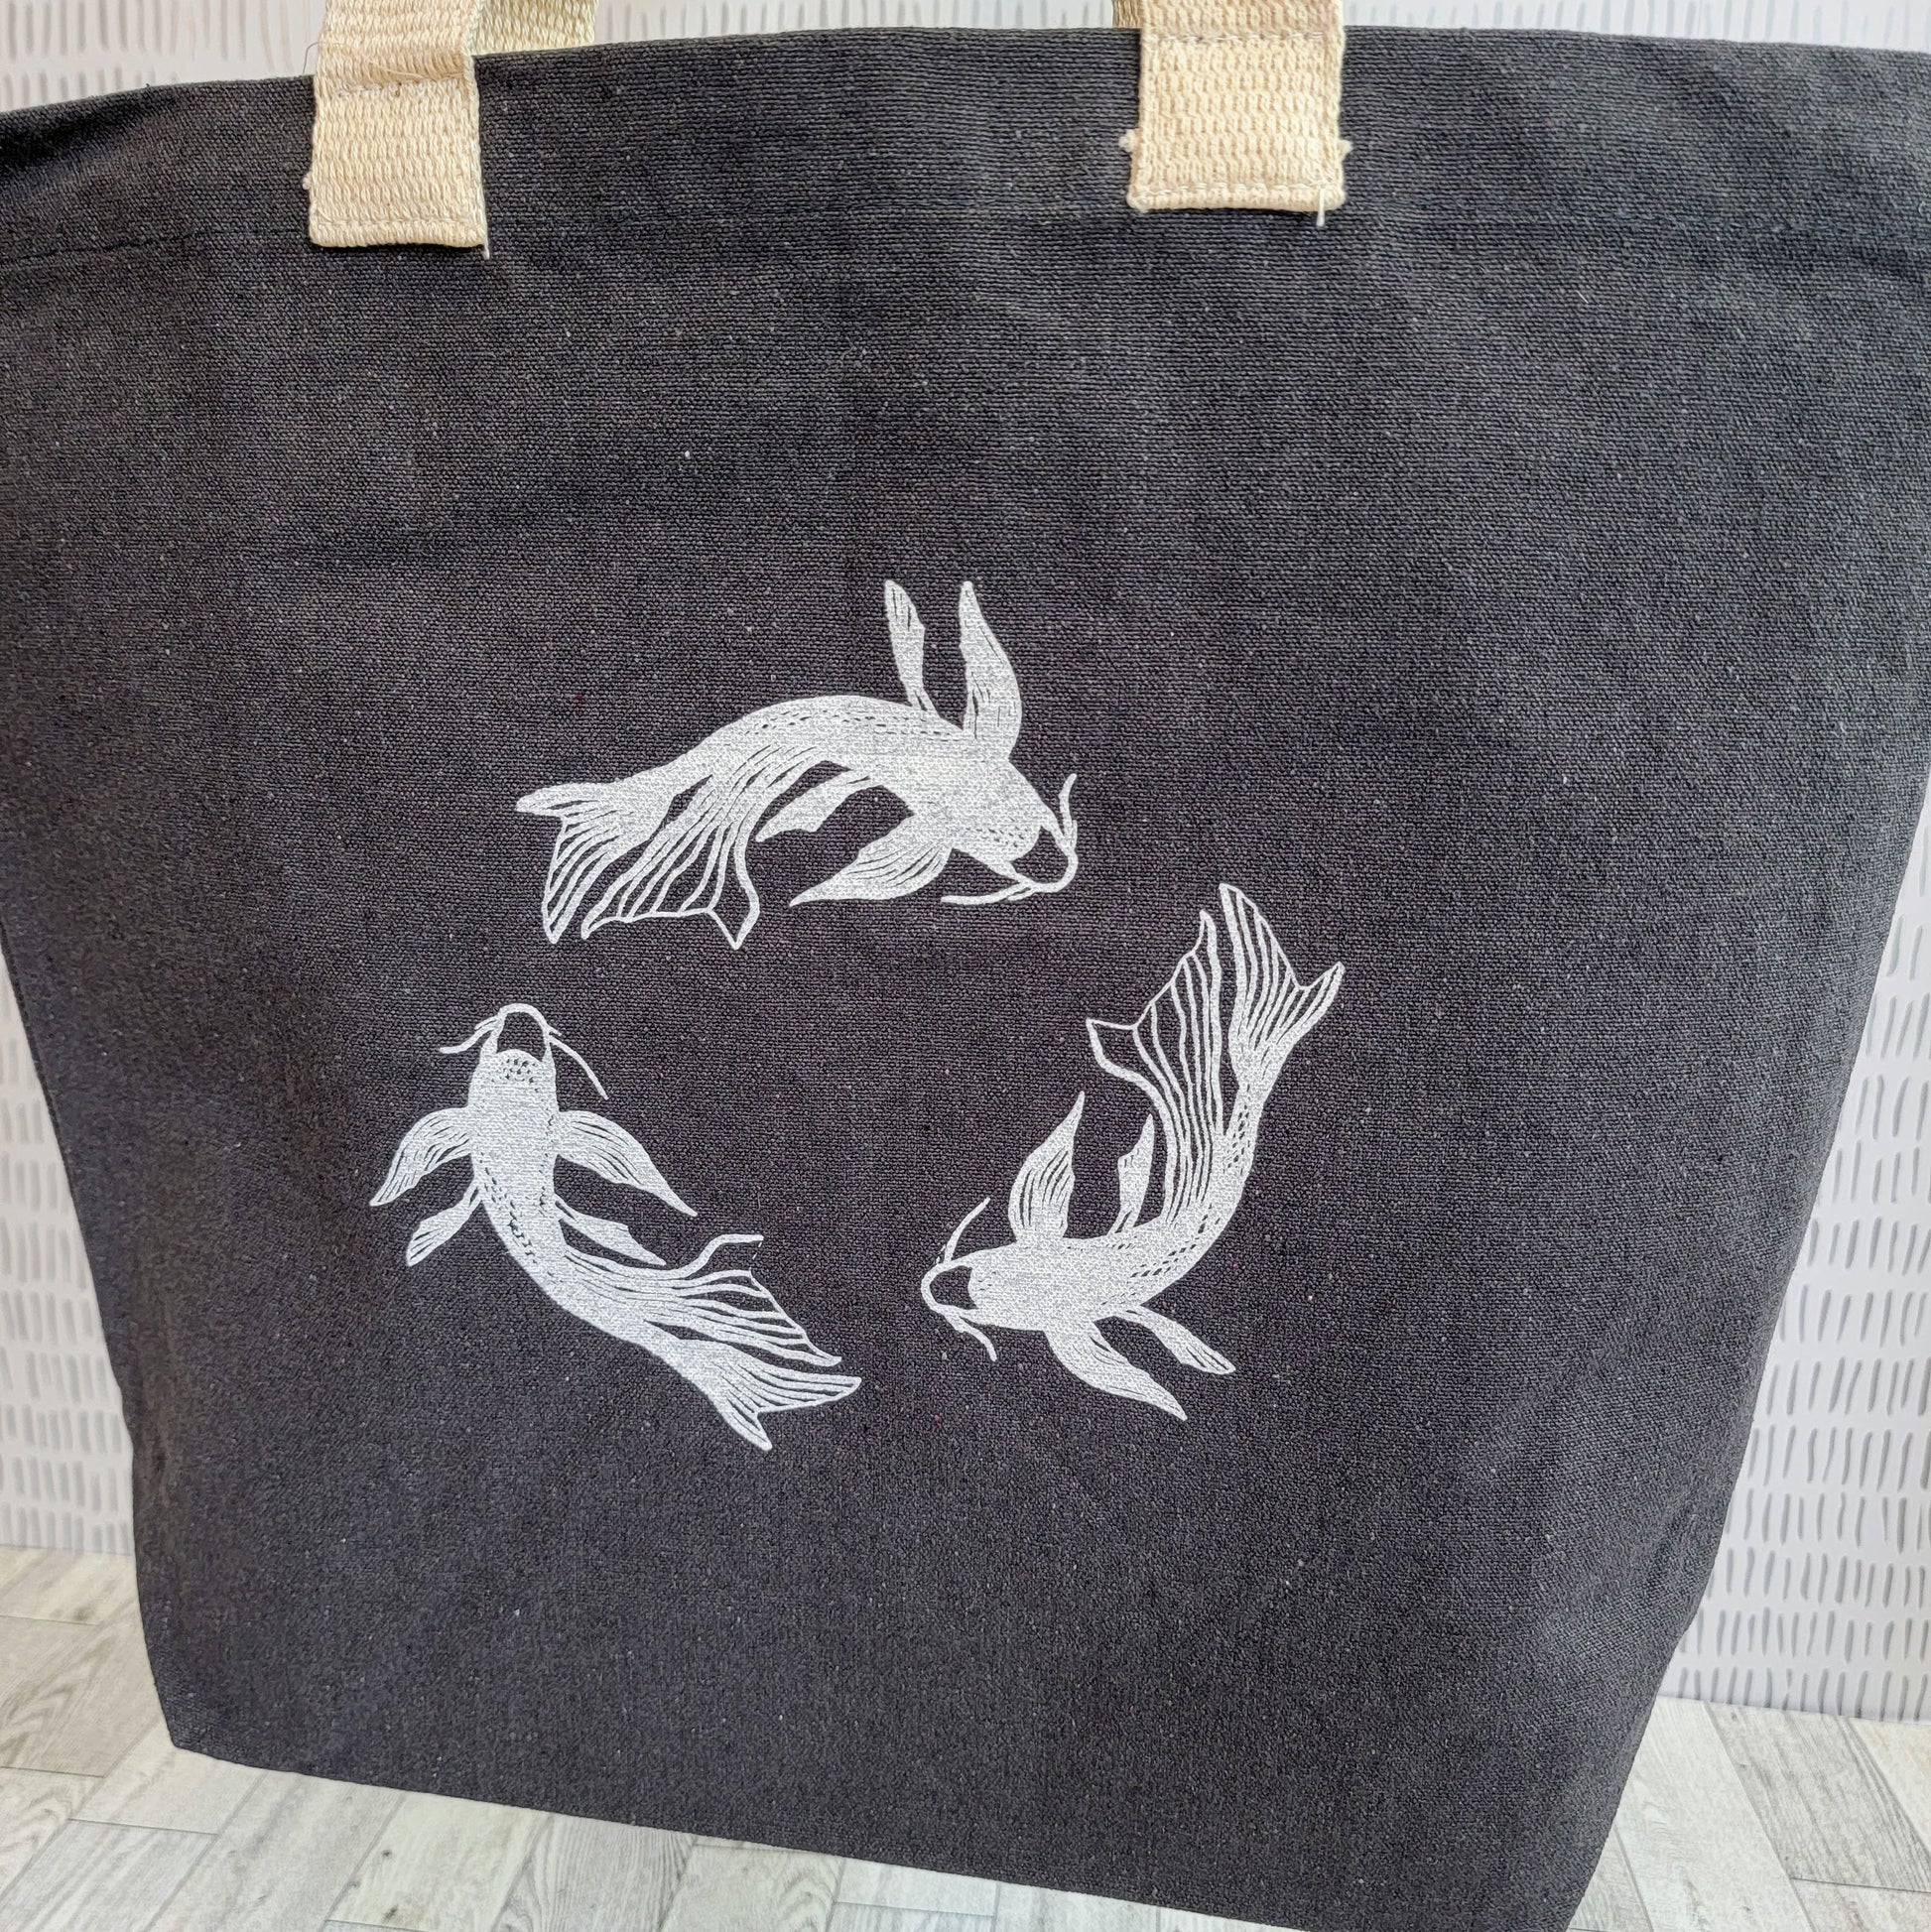 Koi Fish Recycled Canvas Tote Bag - White on Dark Grey - Front Shot